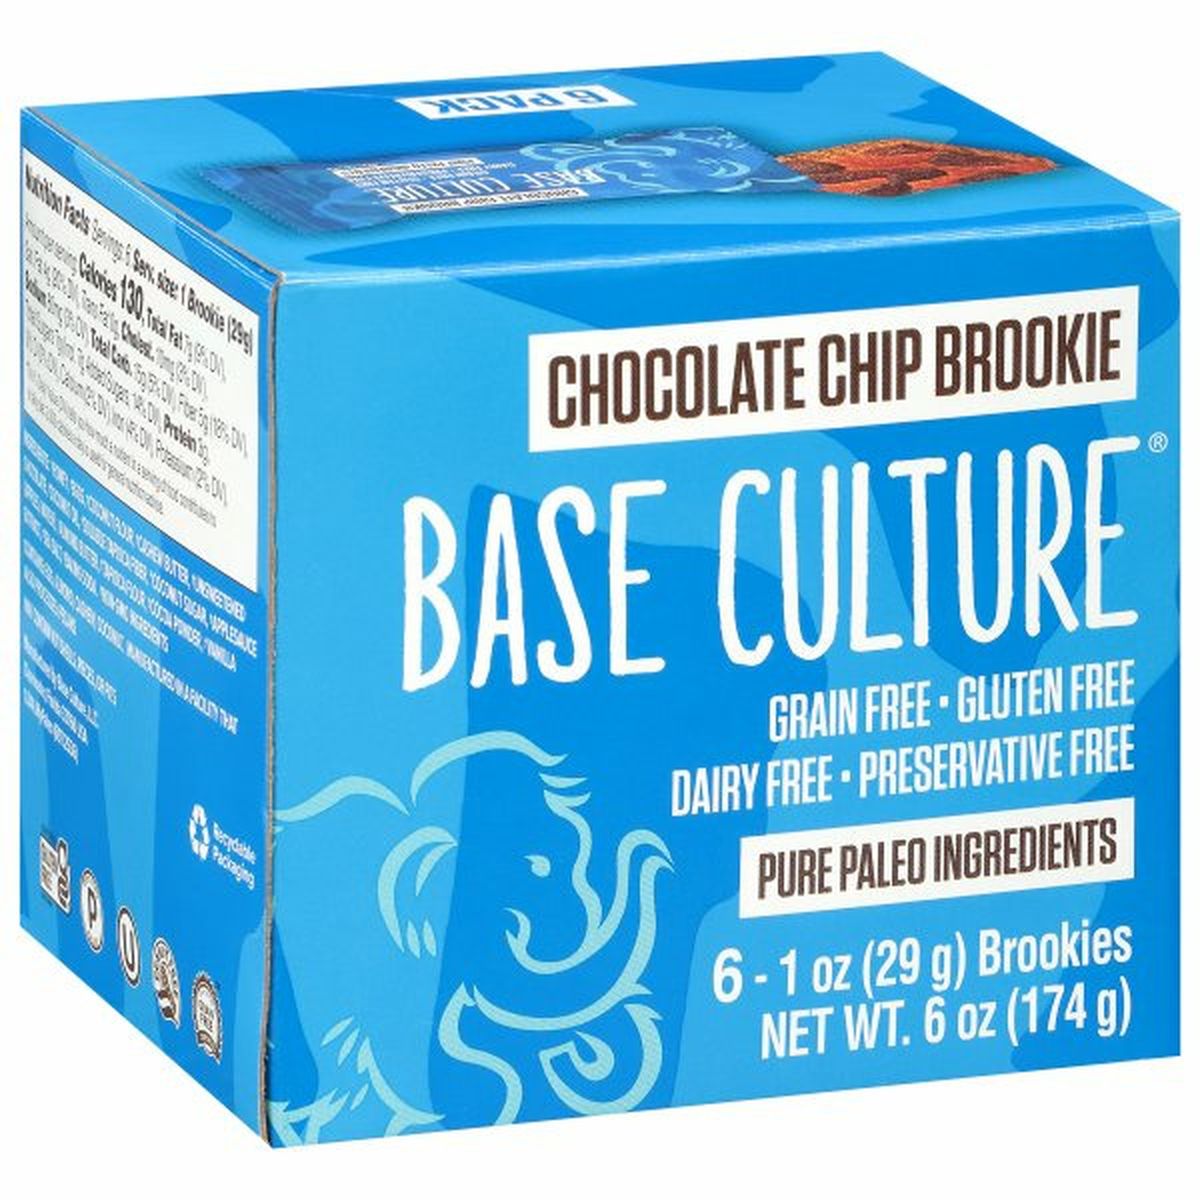 Calories in Base Culture Brookies, Chocolate Chip